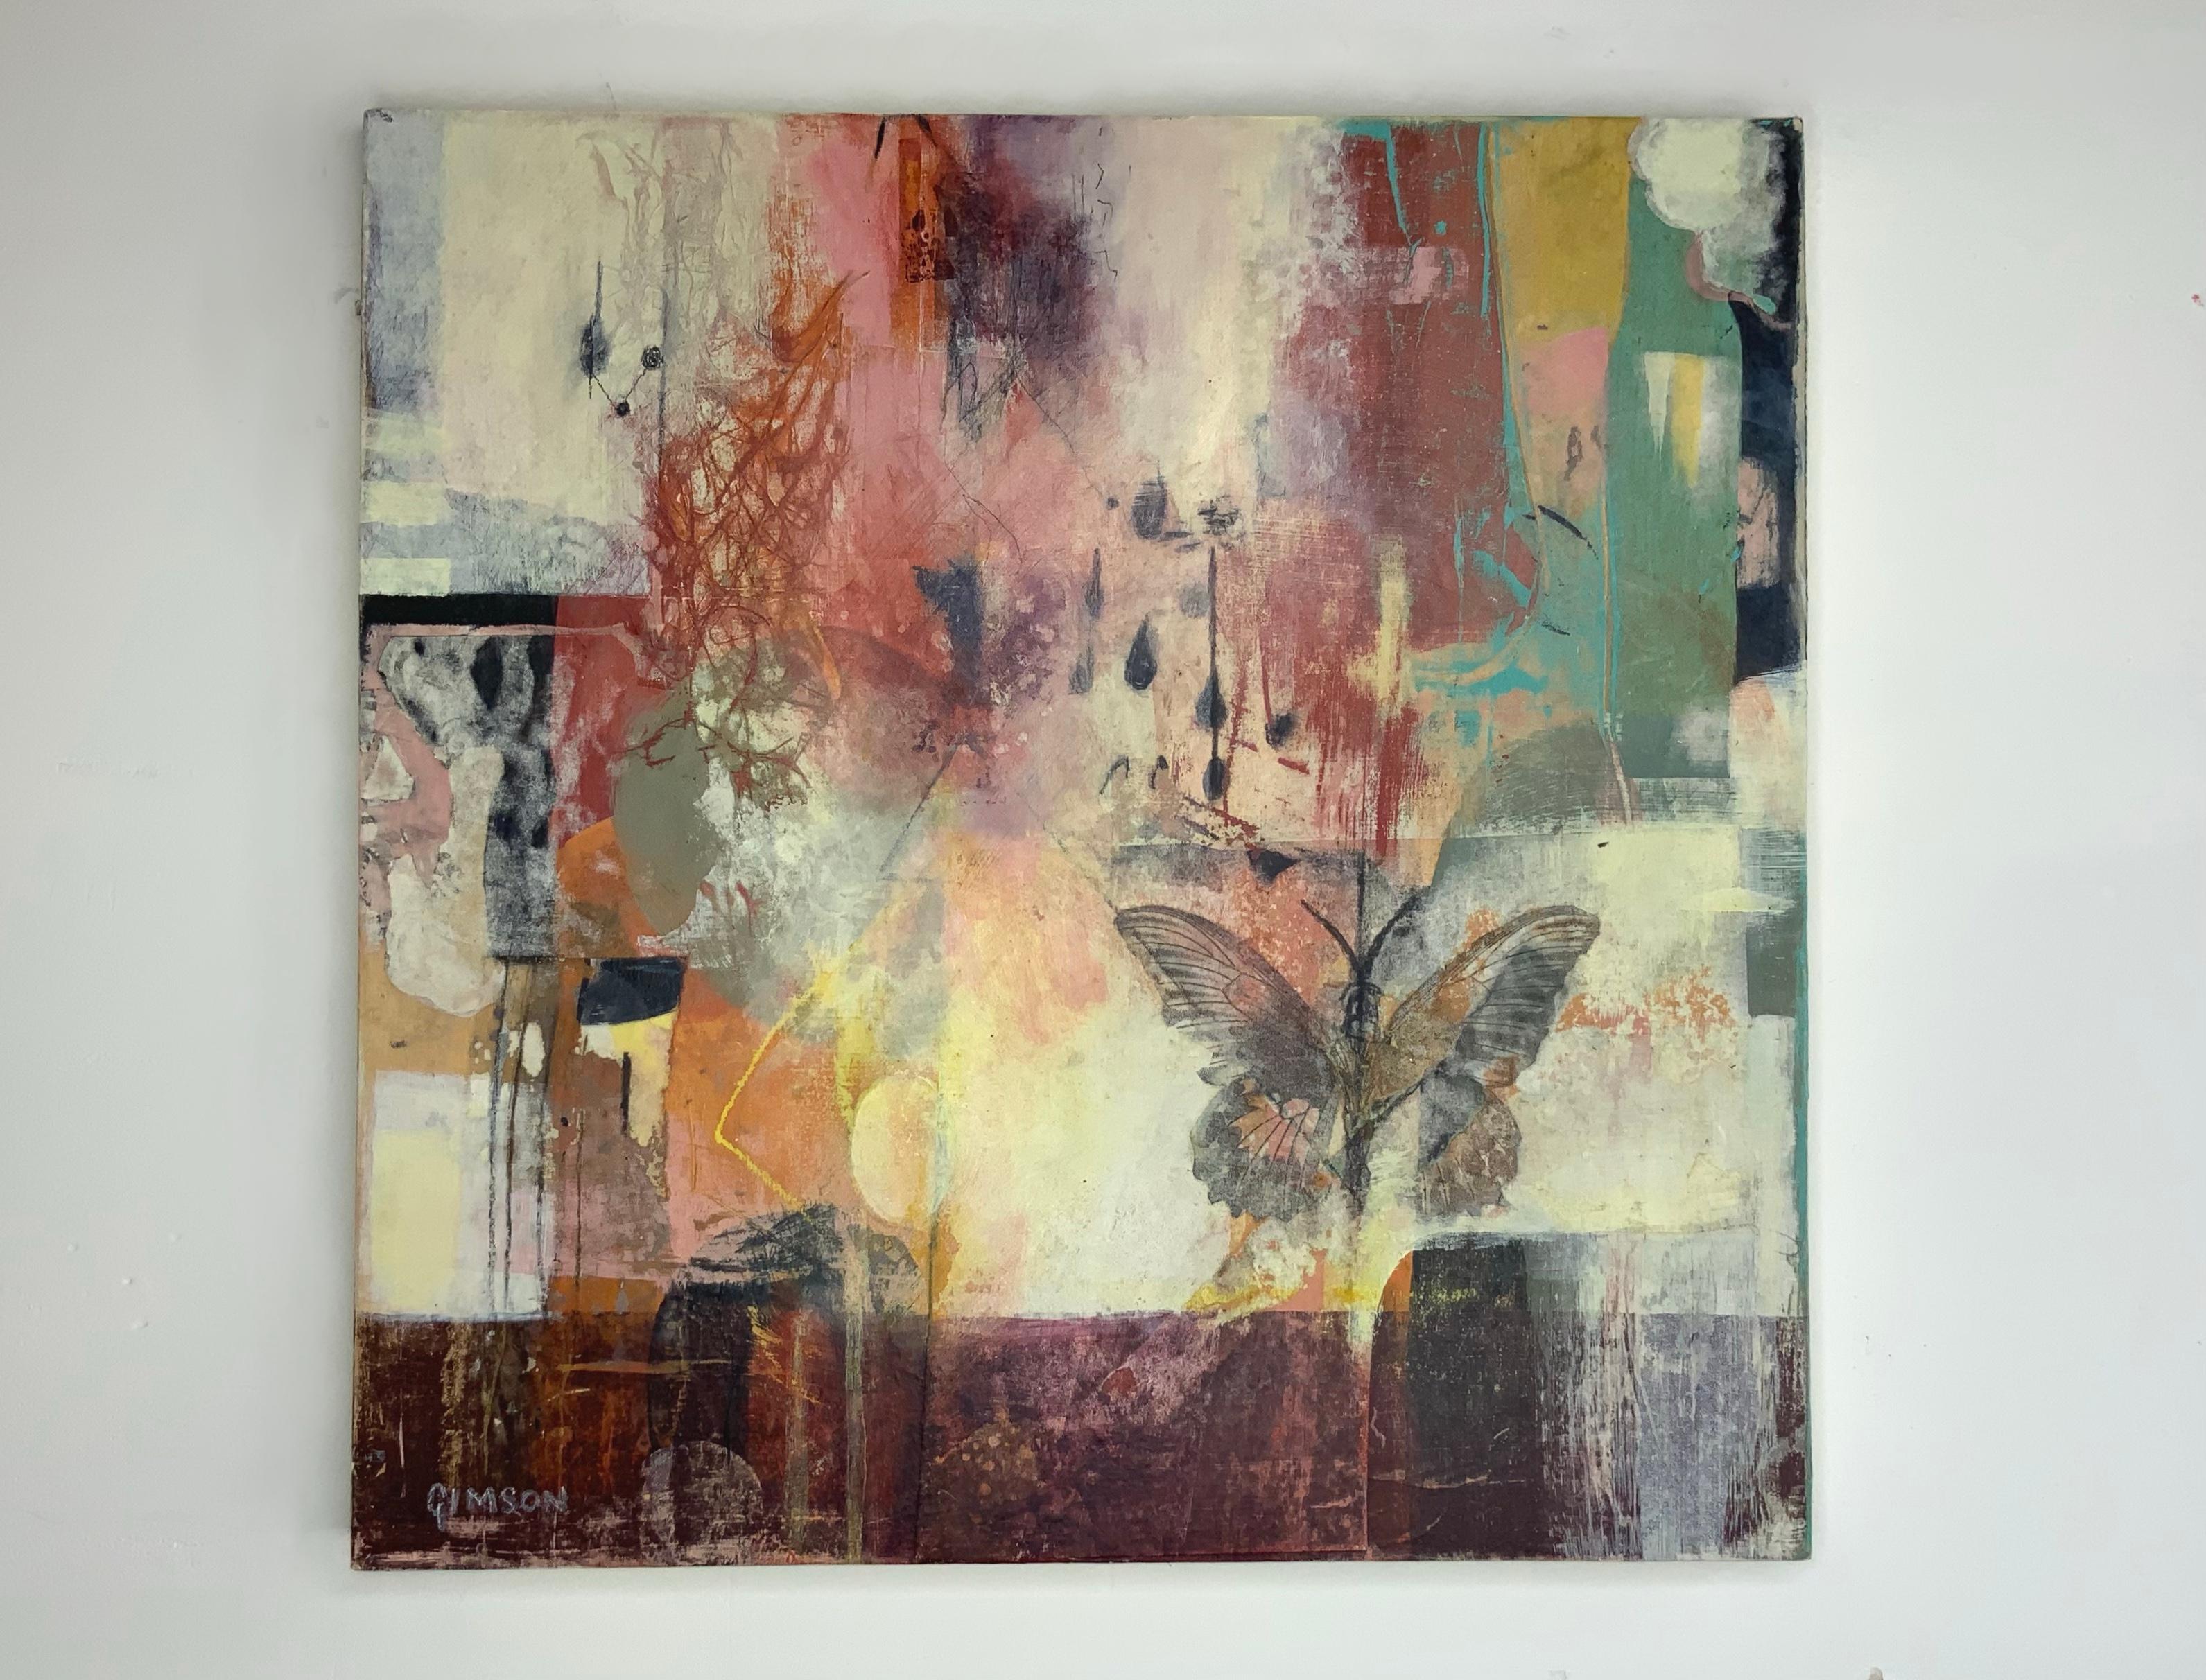 <p>Artist Comments<br>Artist Steph Gimson crafts an abstract display of a butterfly in a collaged background. She depicts greenery through earthy tones and painterly strokes. Part of her Whimsical collection focusing on nature and fantasy themes